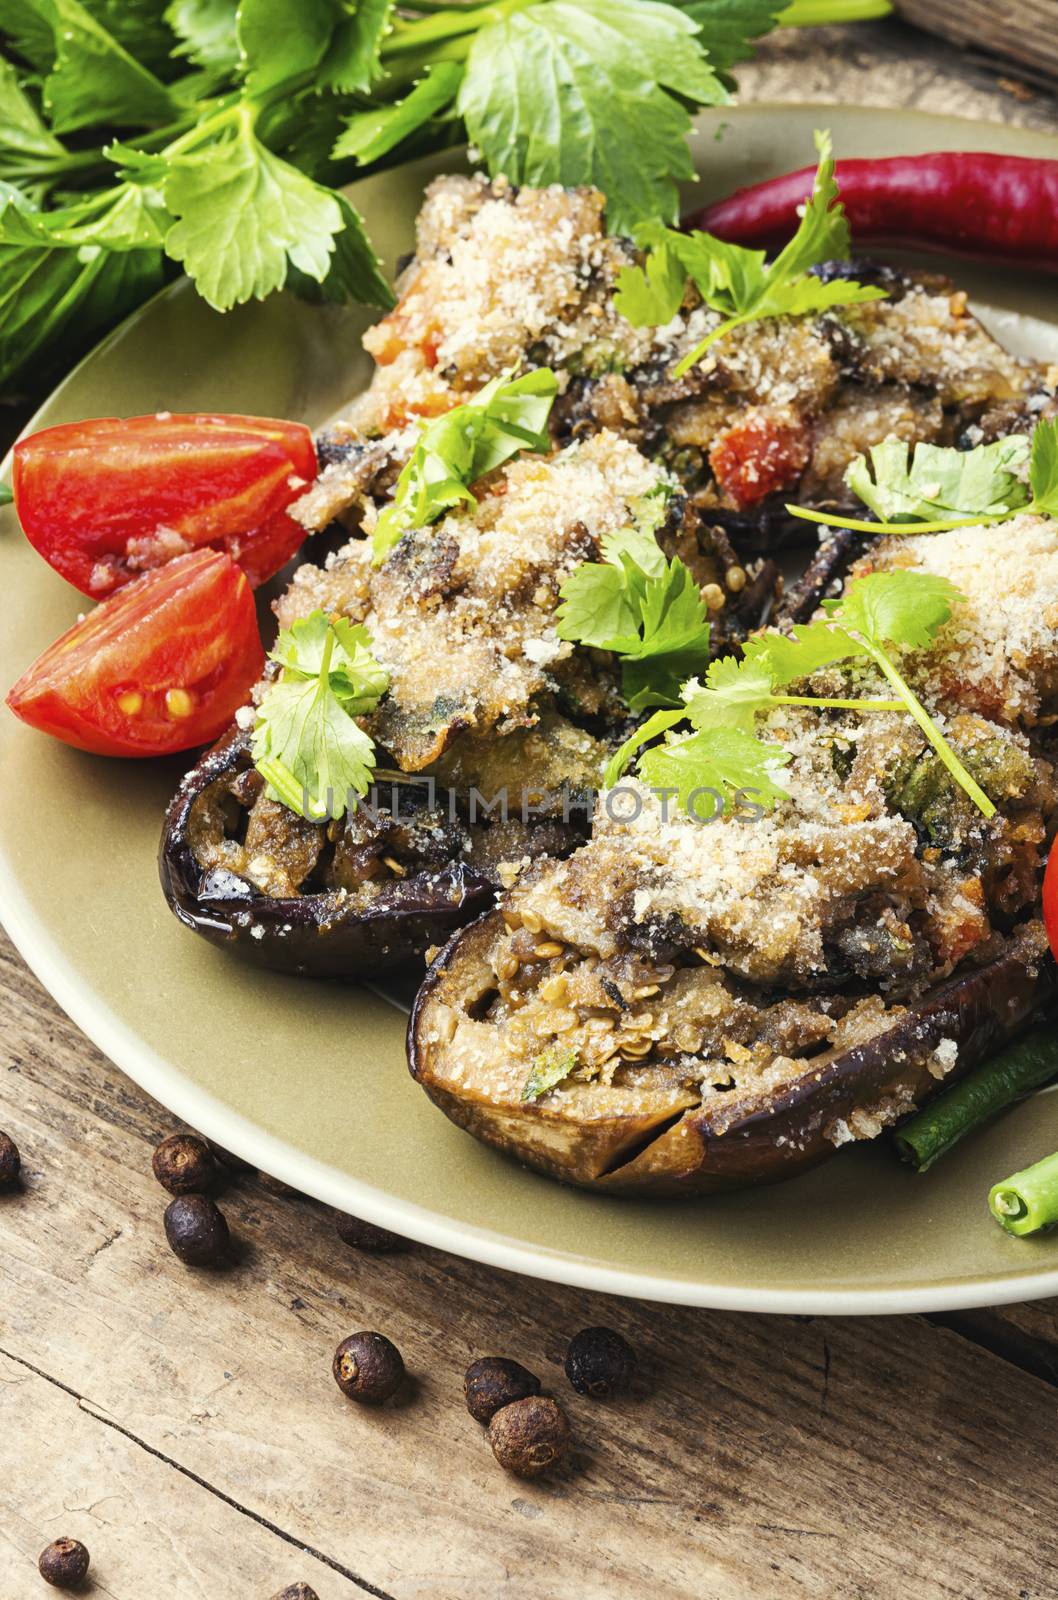 Baked eggplant with vegetables.Roasted vegetables on plate